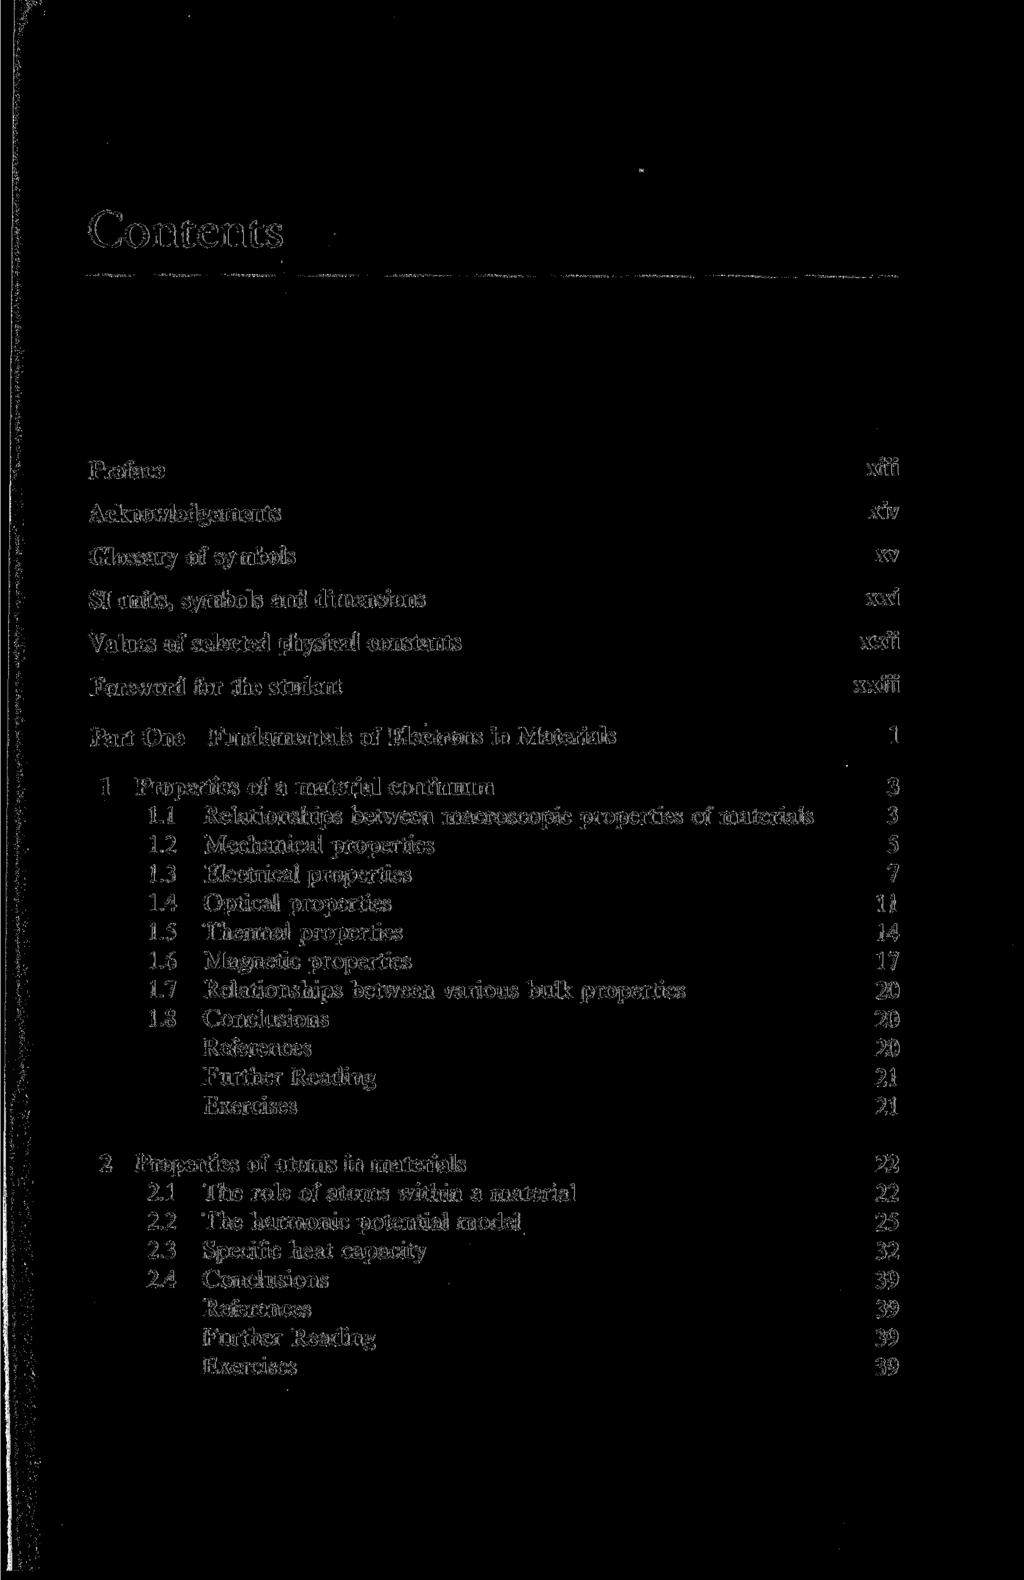 Contents Preface Acknowledgements Glossary of symbols SI units, symbols and dimensions Values of selected physical constants Foreword for the student xiii xiv xv xxi xxii xxiii Part One Fundamentals